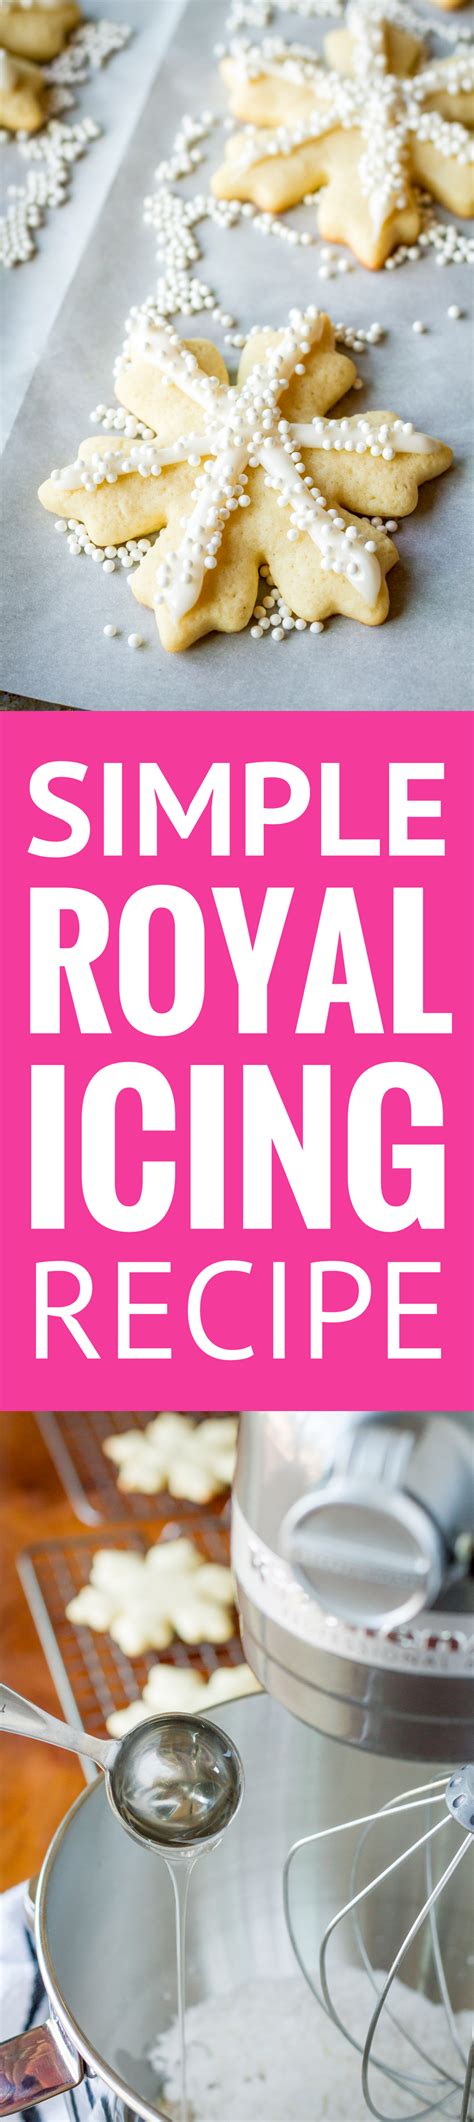 We keep our cookie decorating far less ornate note: Simple Royal Icing Recipe -- this royal icing is SO ridiculously easy to make! No egg whites, no ...